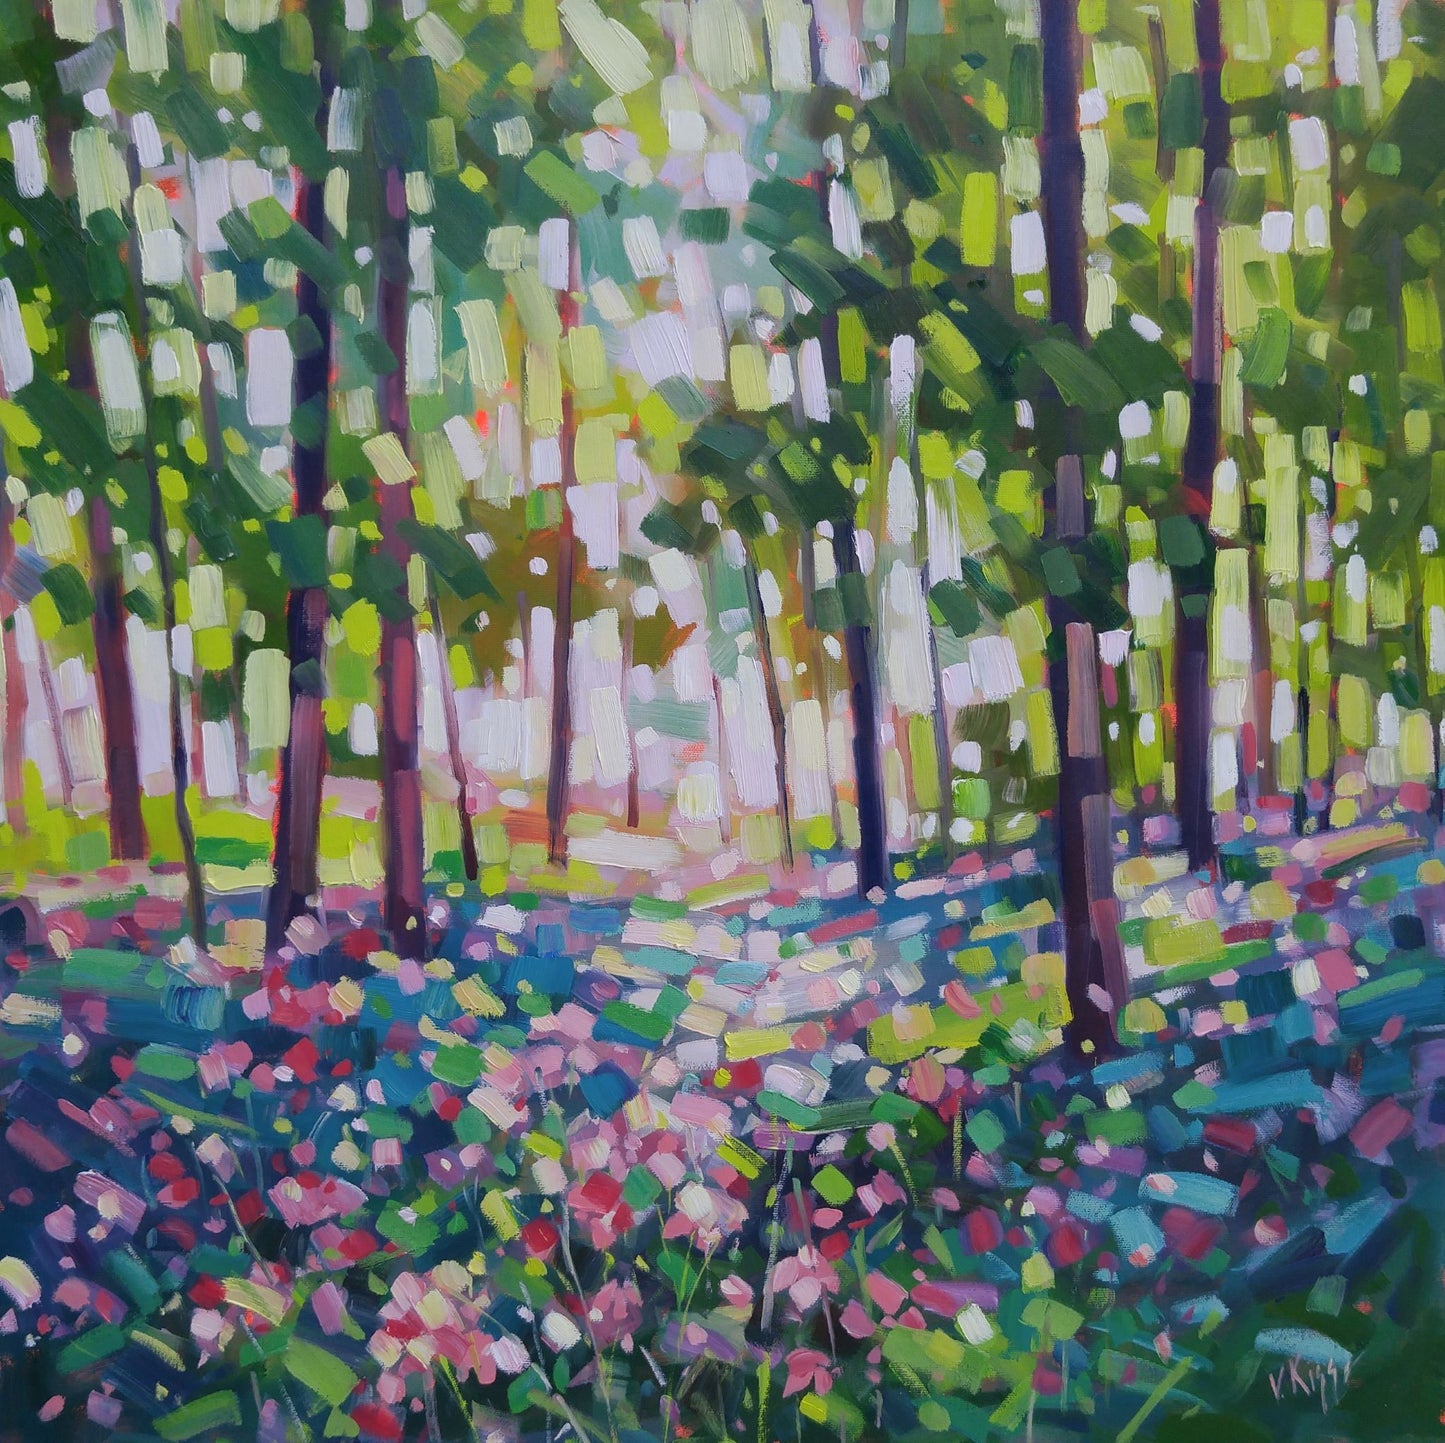 Original oil painting on canvas impressionistic spring Canadian landscape by local artist Vera Kisseleva